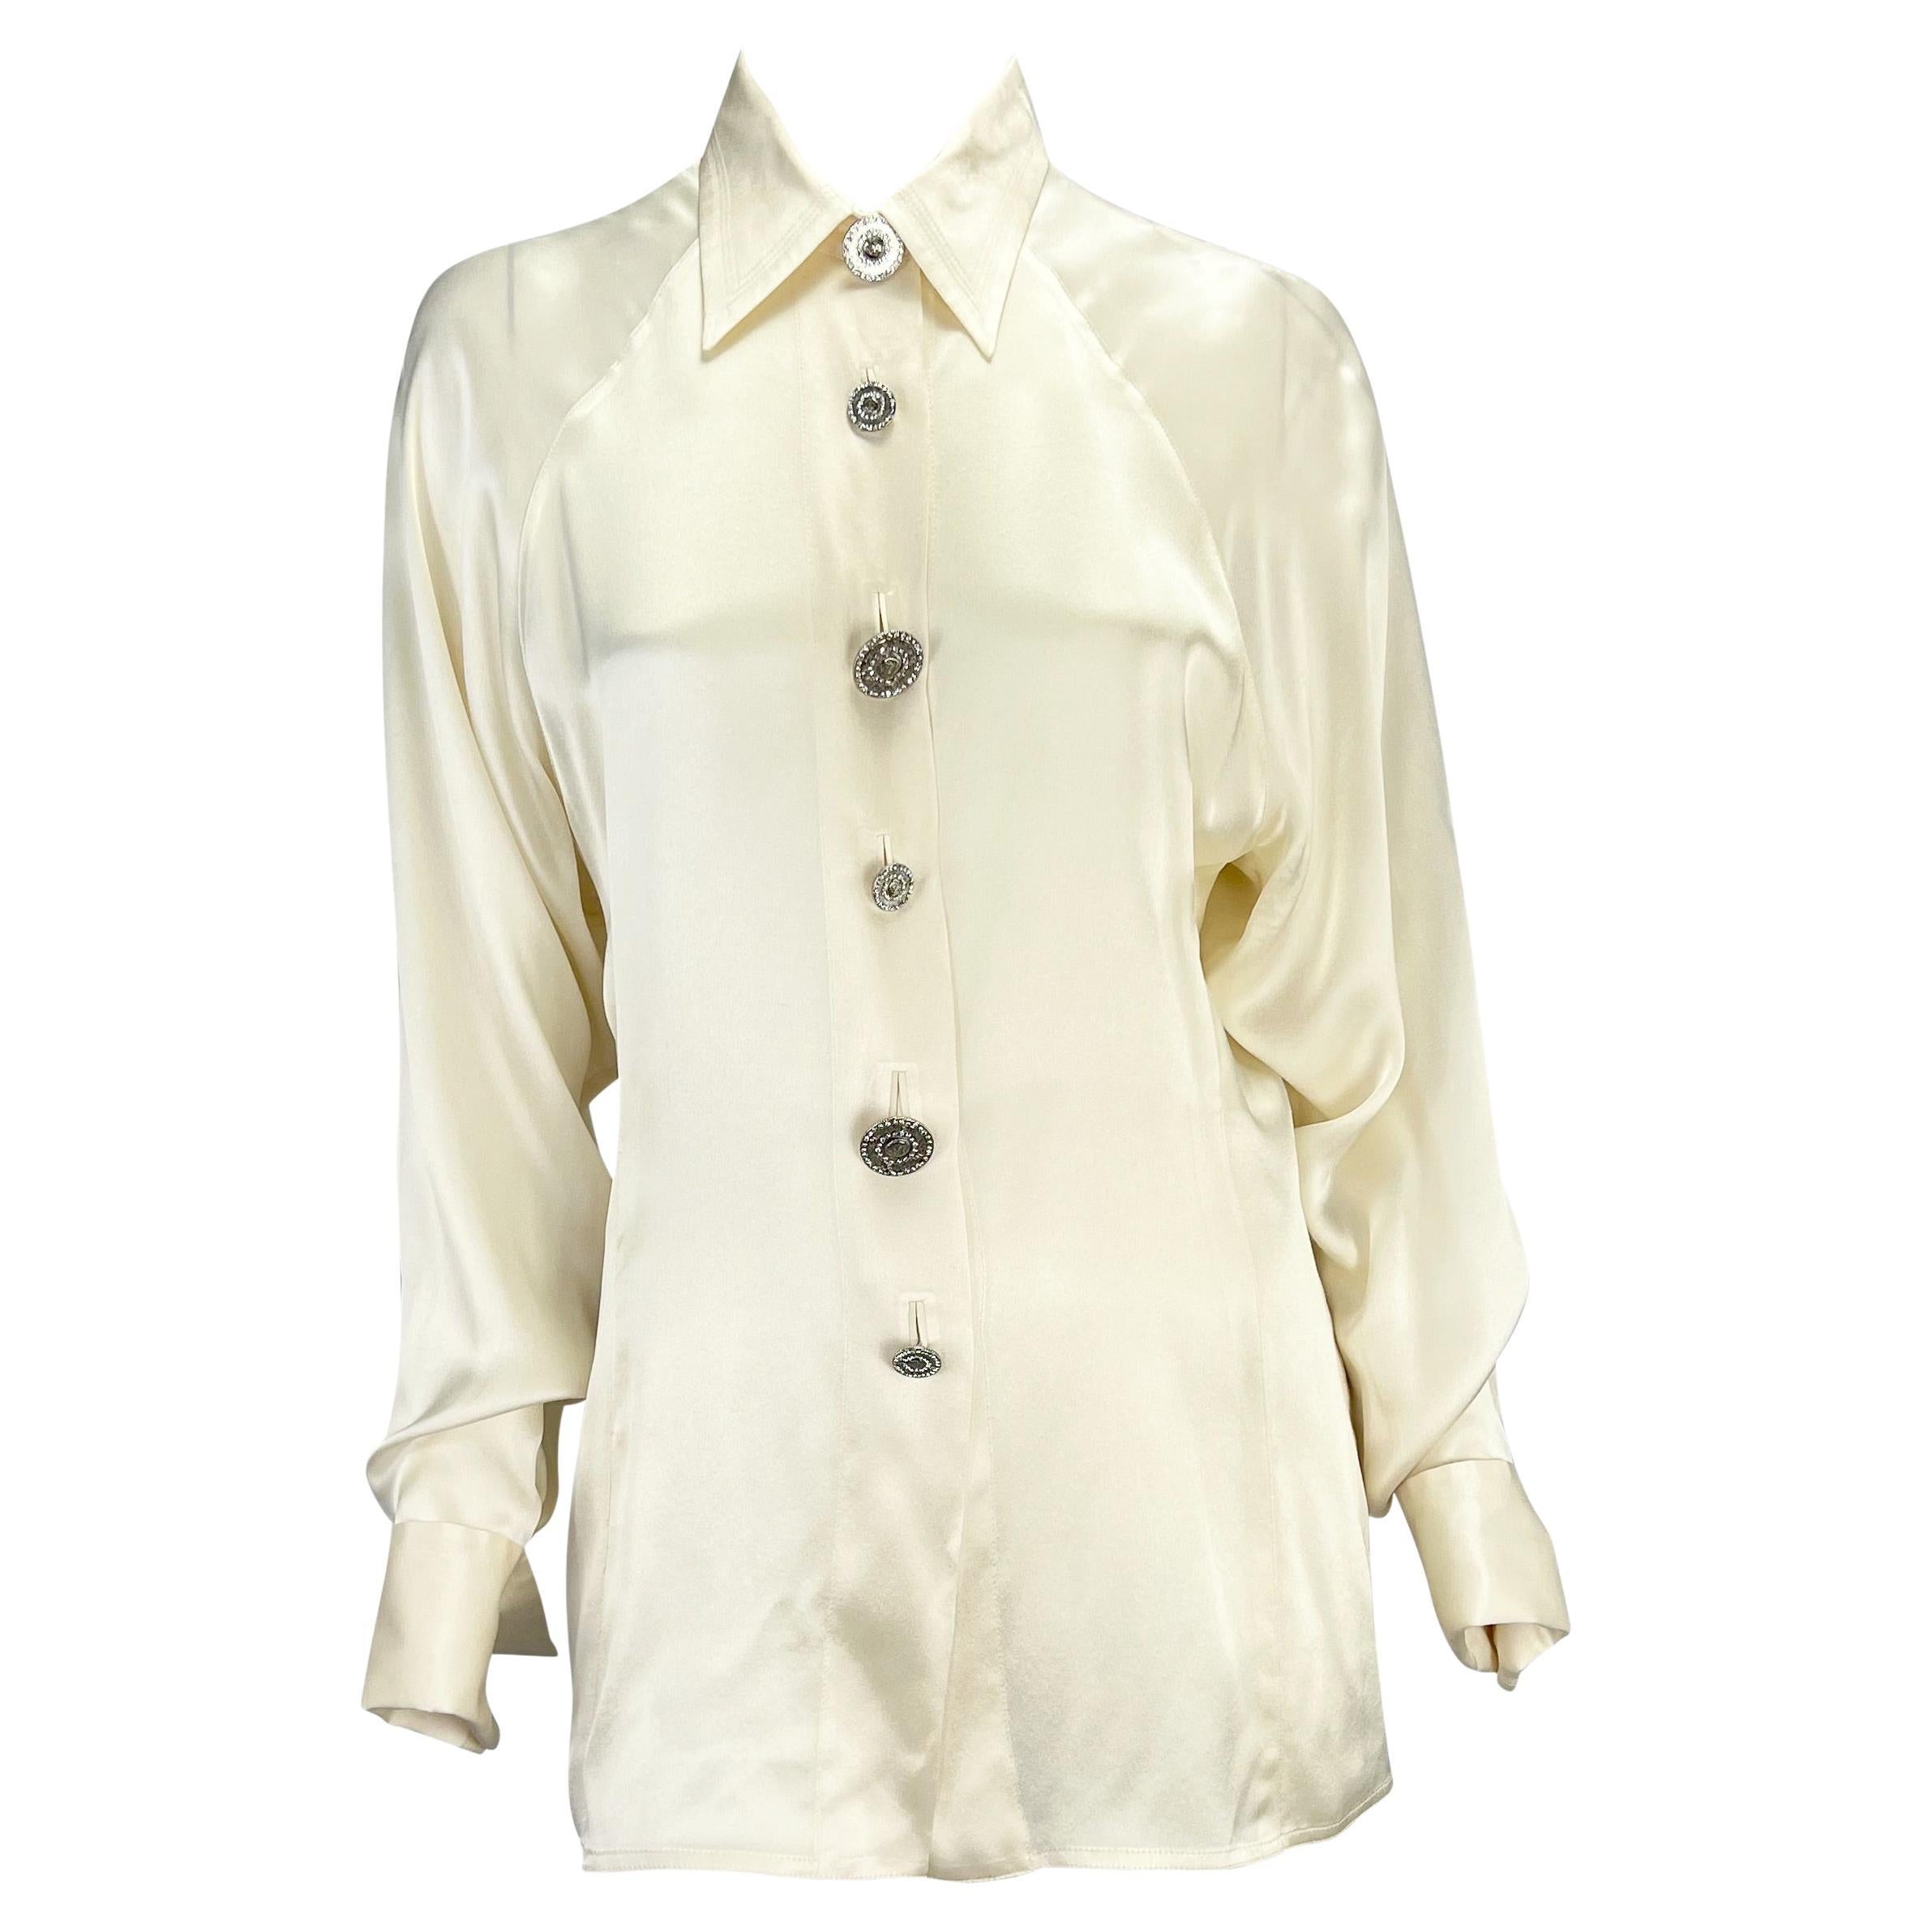 1990s Gianni Versace Couture White Rhinestone Medusa French Cuff Button Up Top For Sale